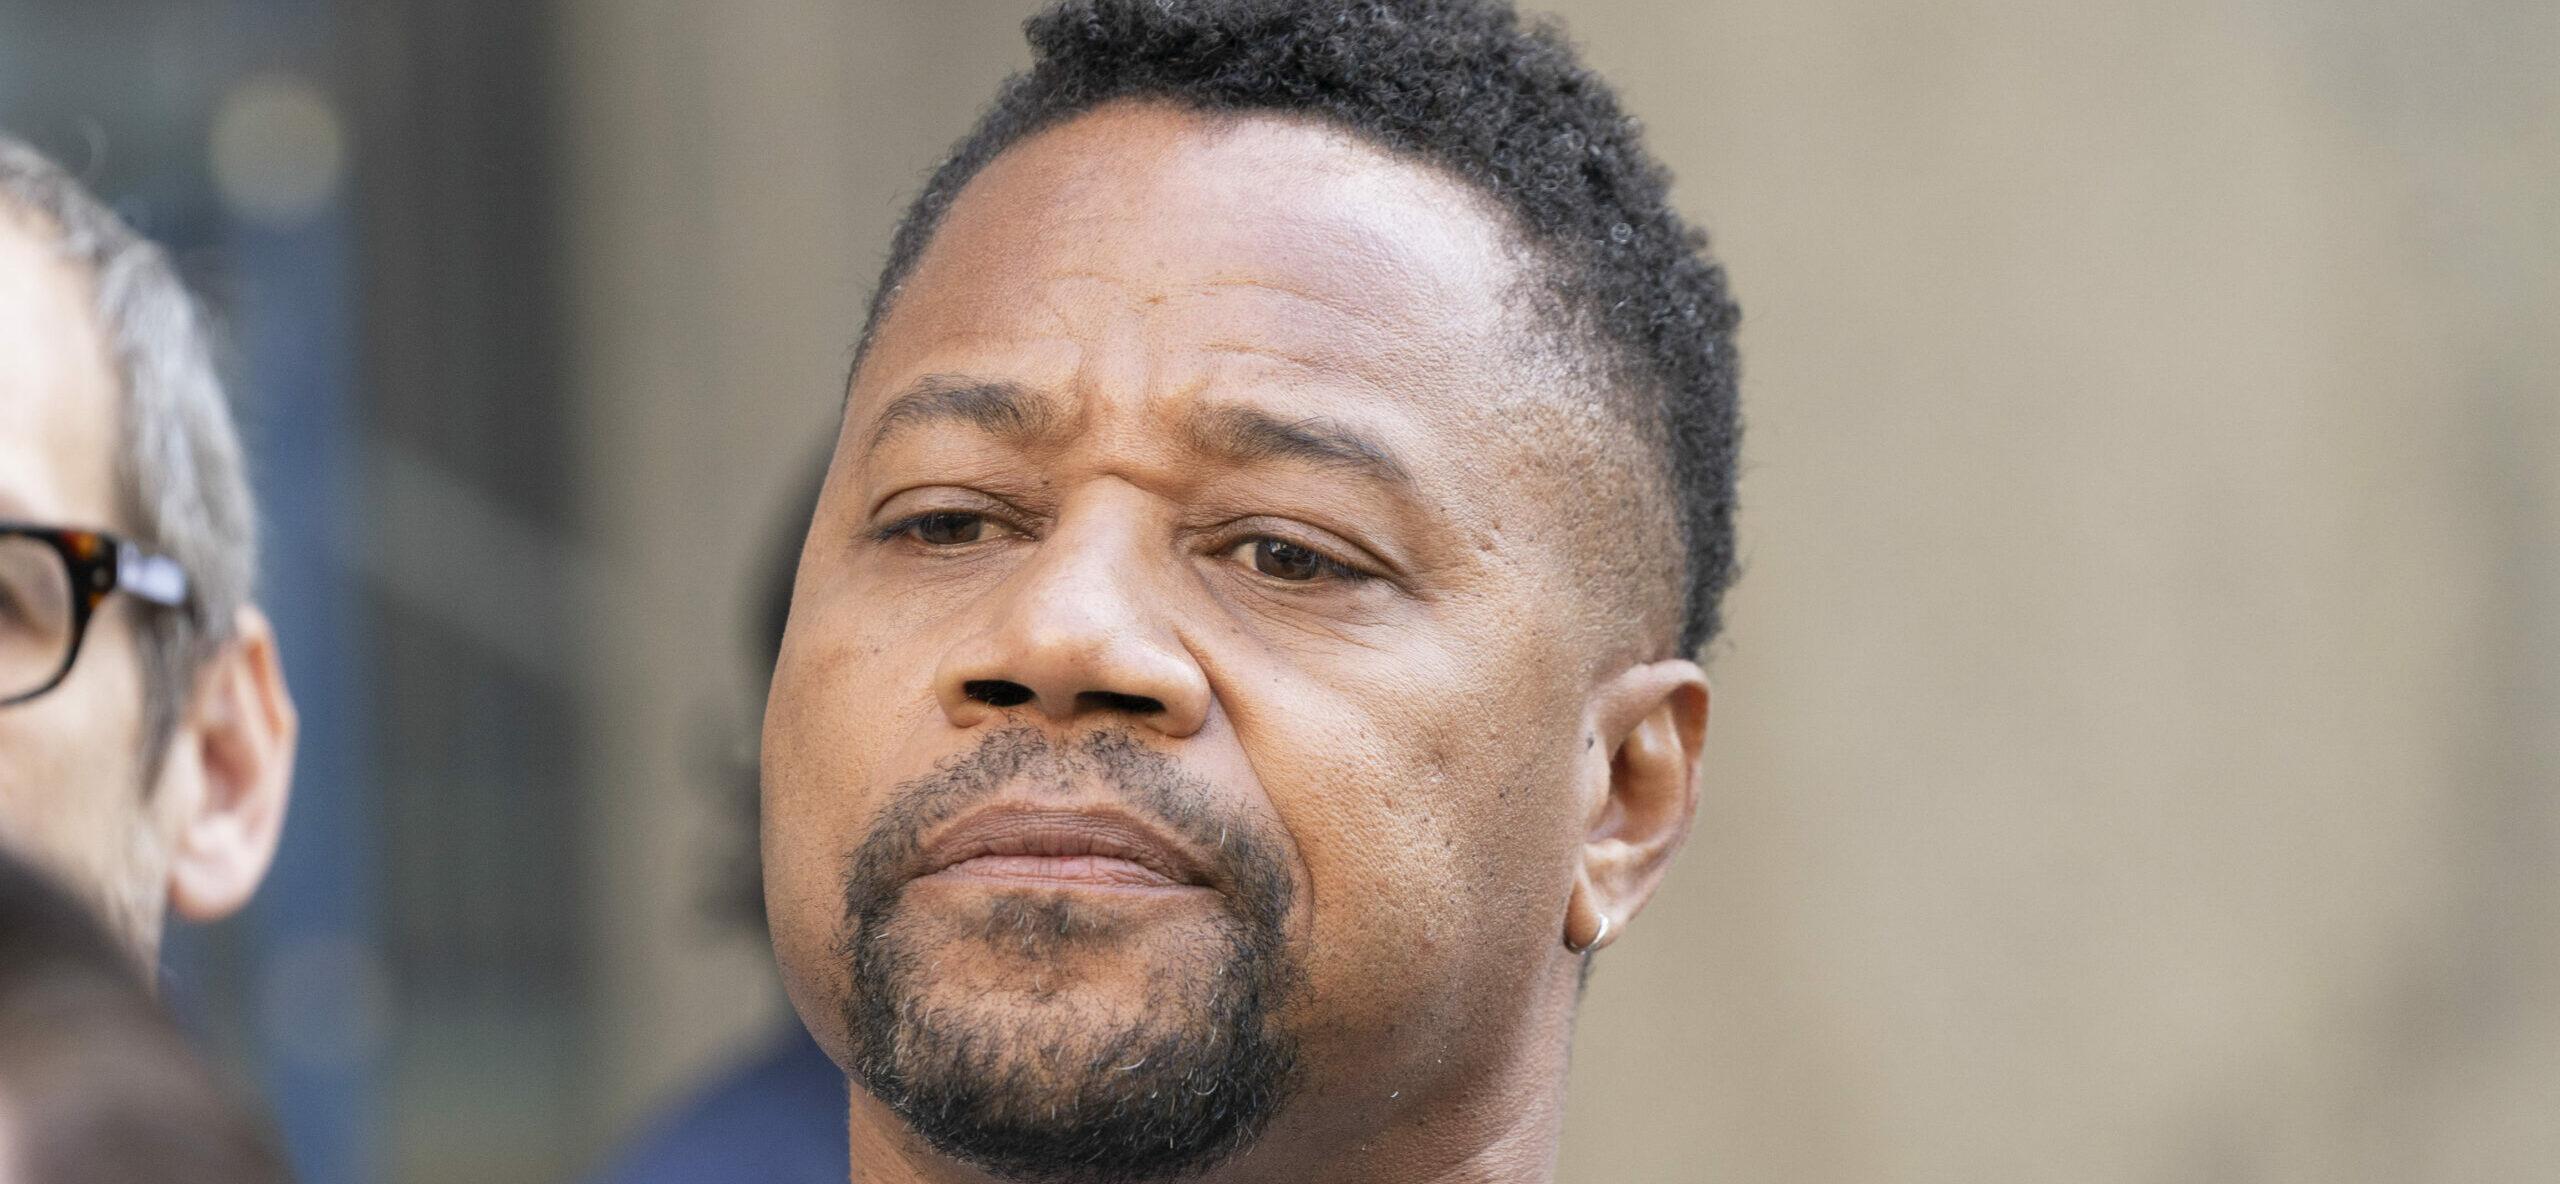 Cuba Gooding Jr. Successfully Evades Jail Time Thanks To Plea Deal In Groping Case